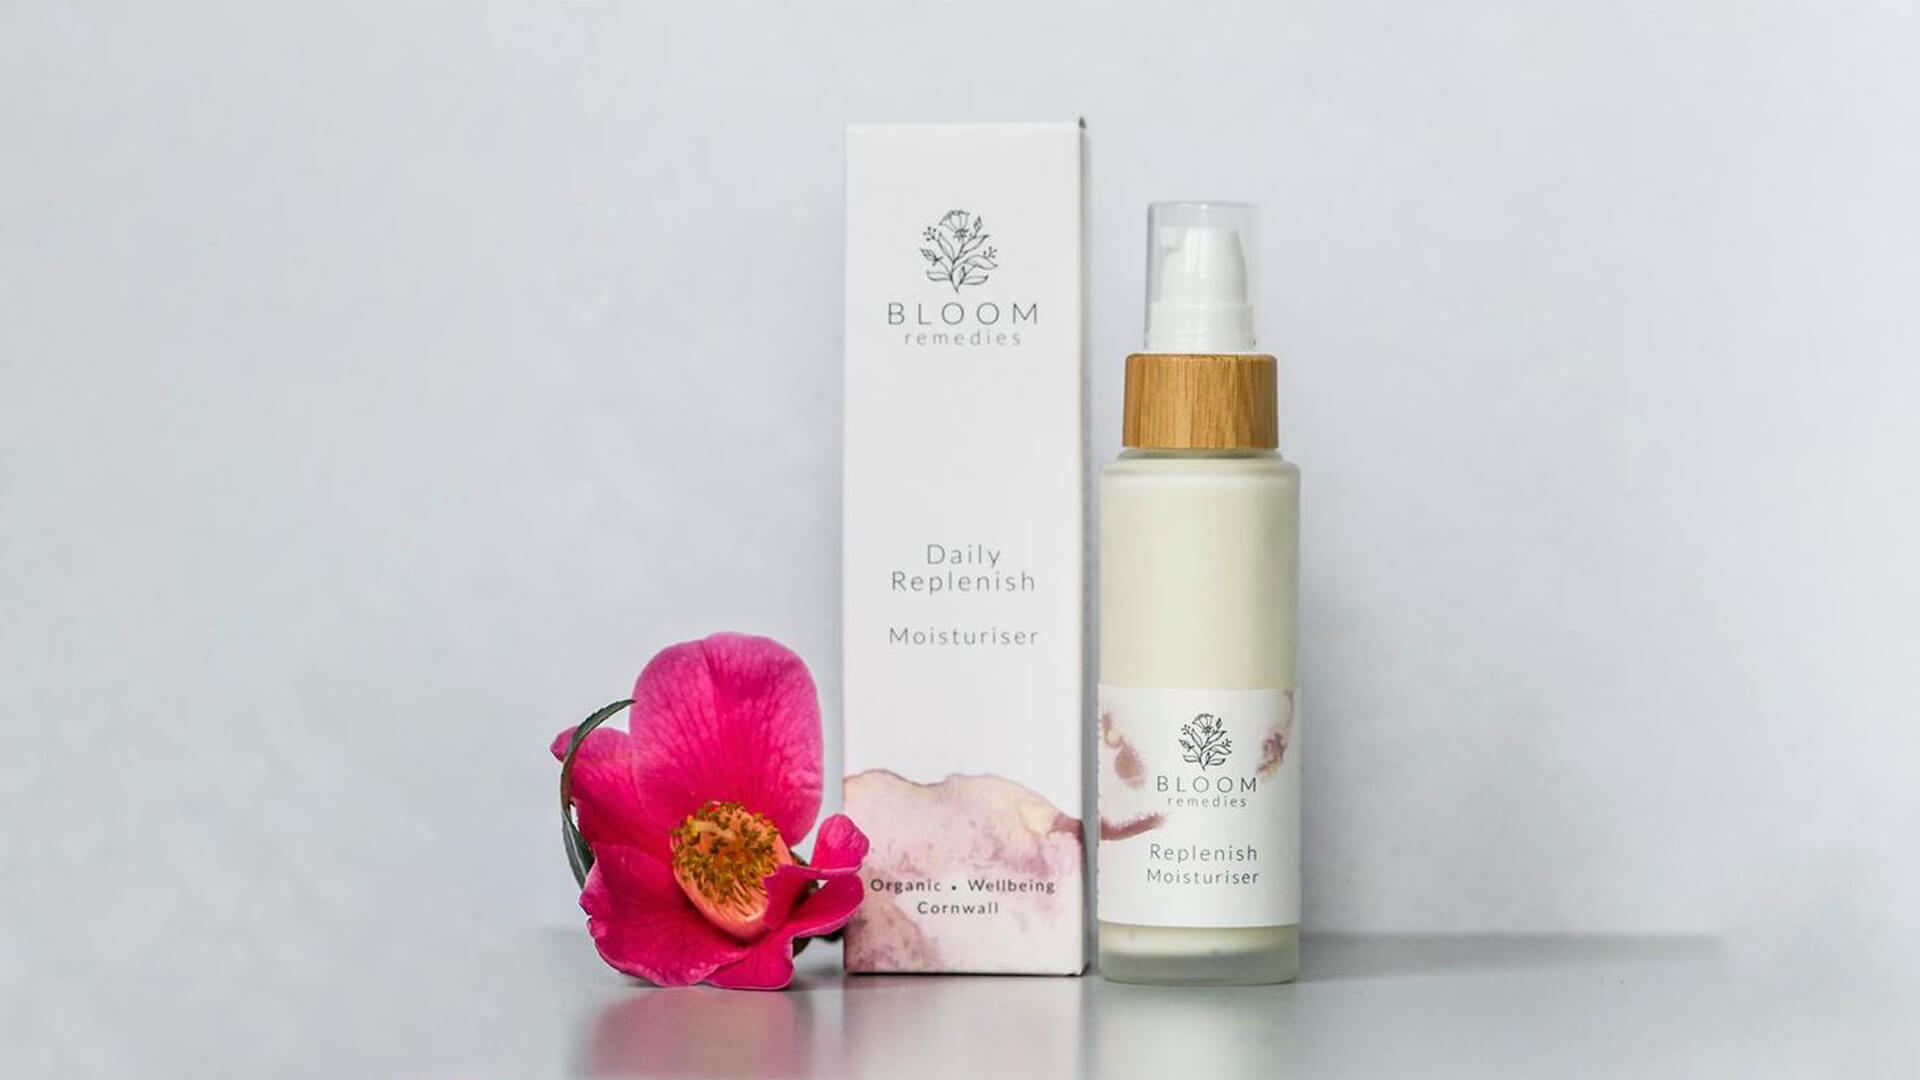 1) Daily Replenish Moisturiser with Neroli and Camellia – Bloom Remedies